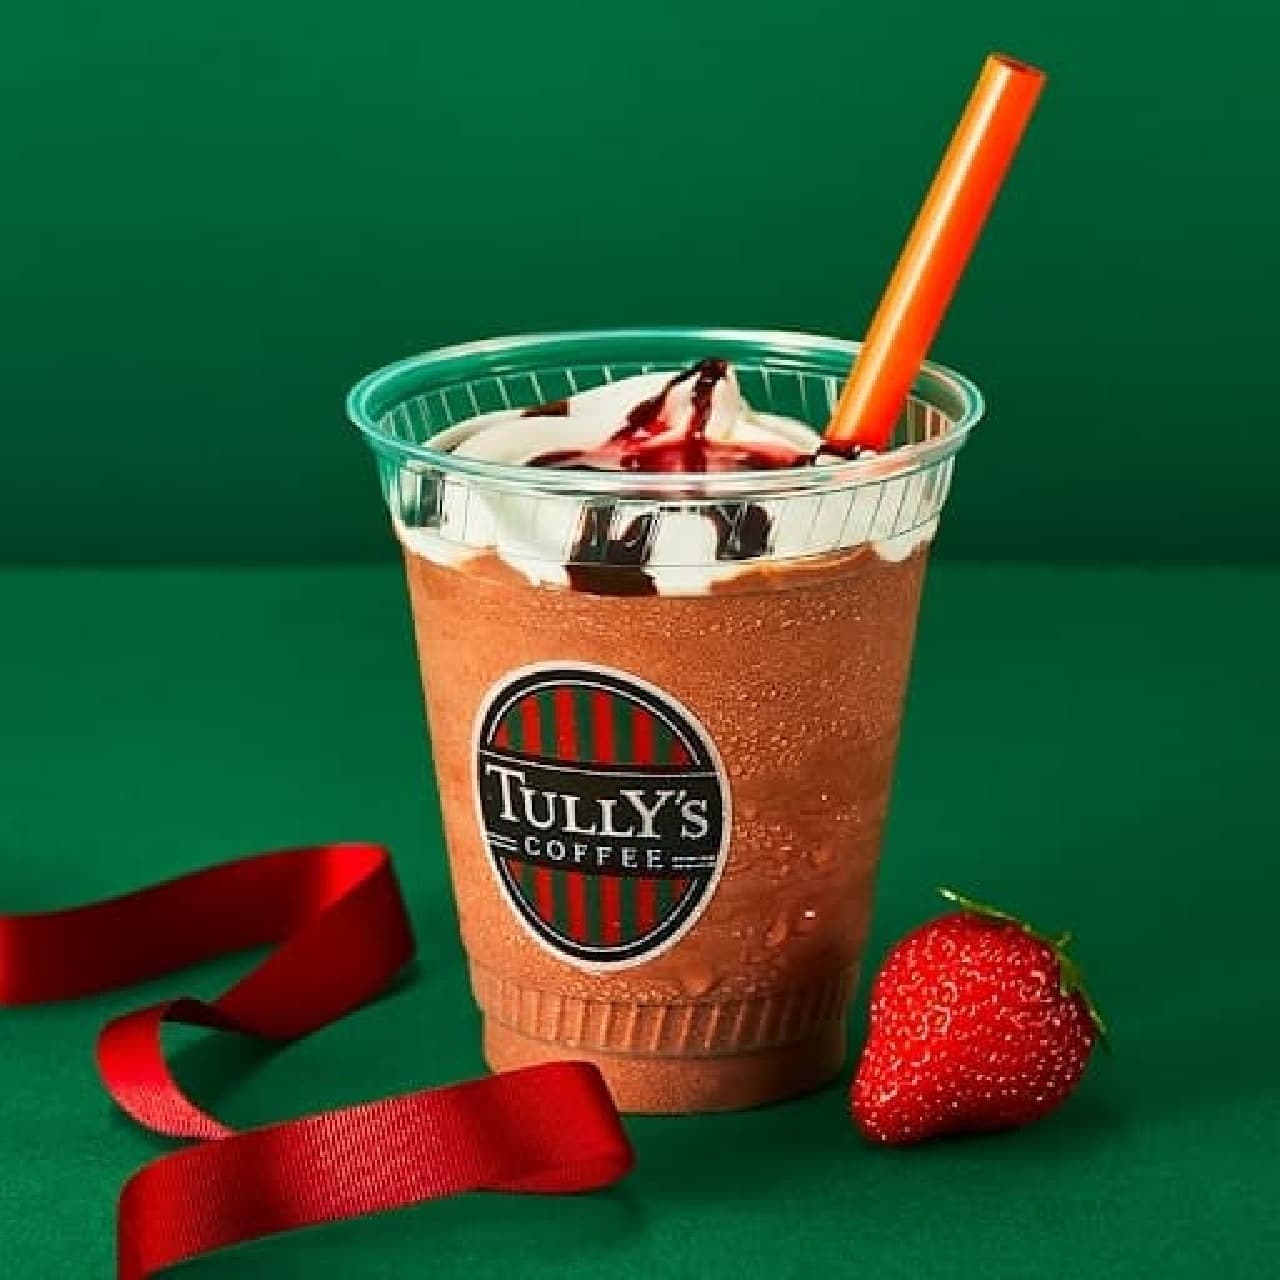 Tully's "Holiday Strawberry Chocolate Lista